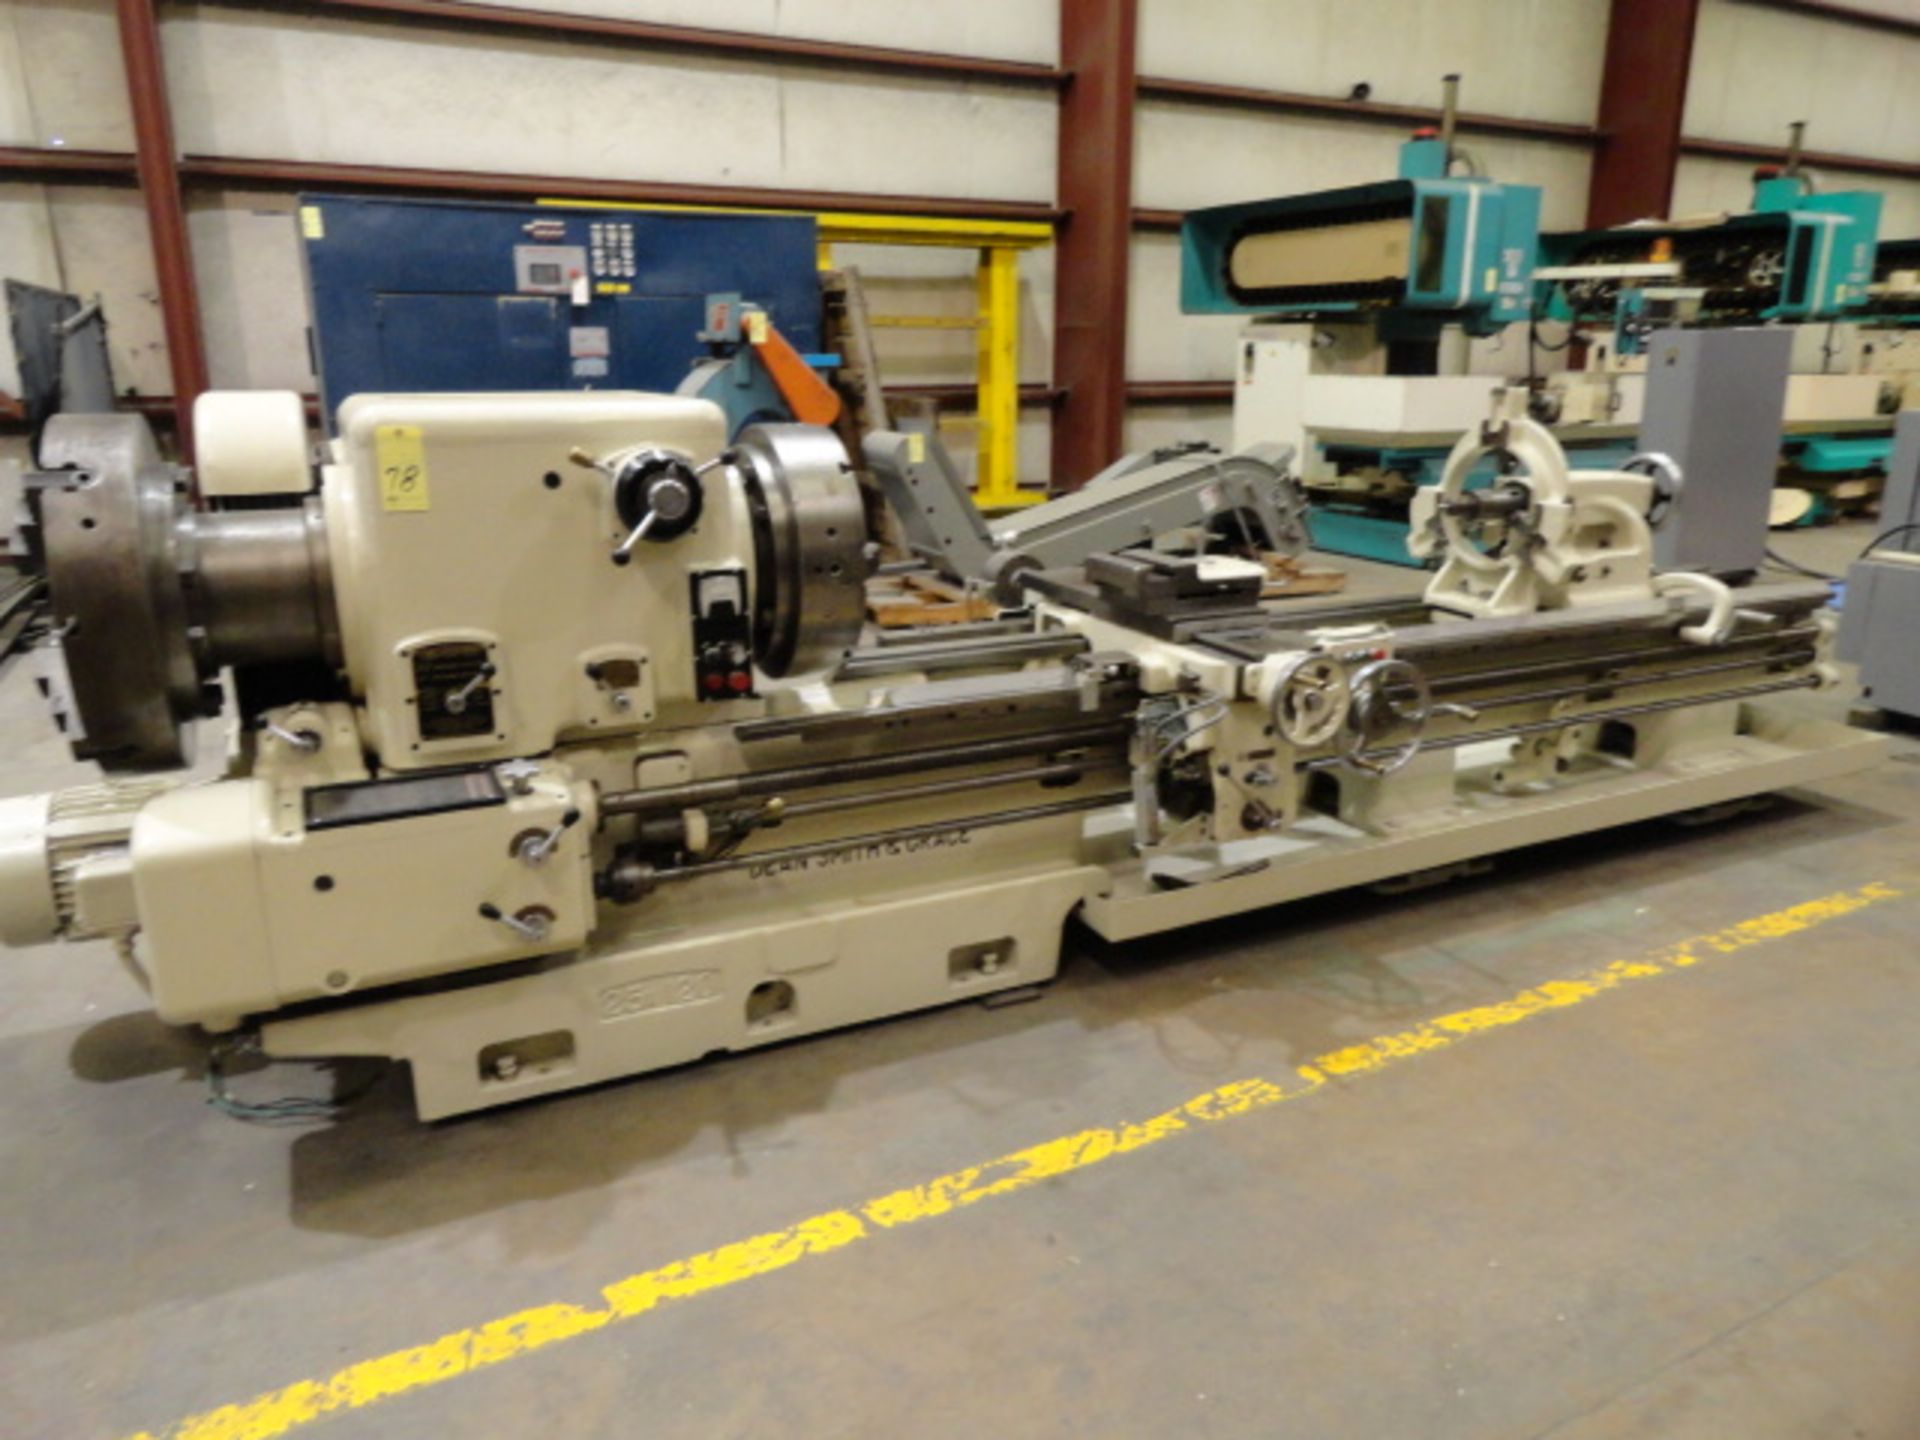 HOLLOW SPINDLE LATHE, DEAN SMITH & GRACE 25" X 120" MDL. 25P, new 1982, 26.5” sw. over bed, 16”